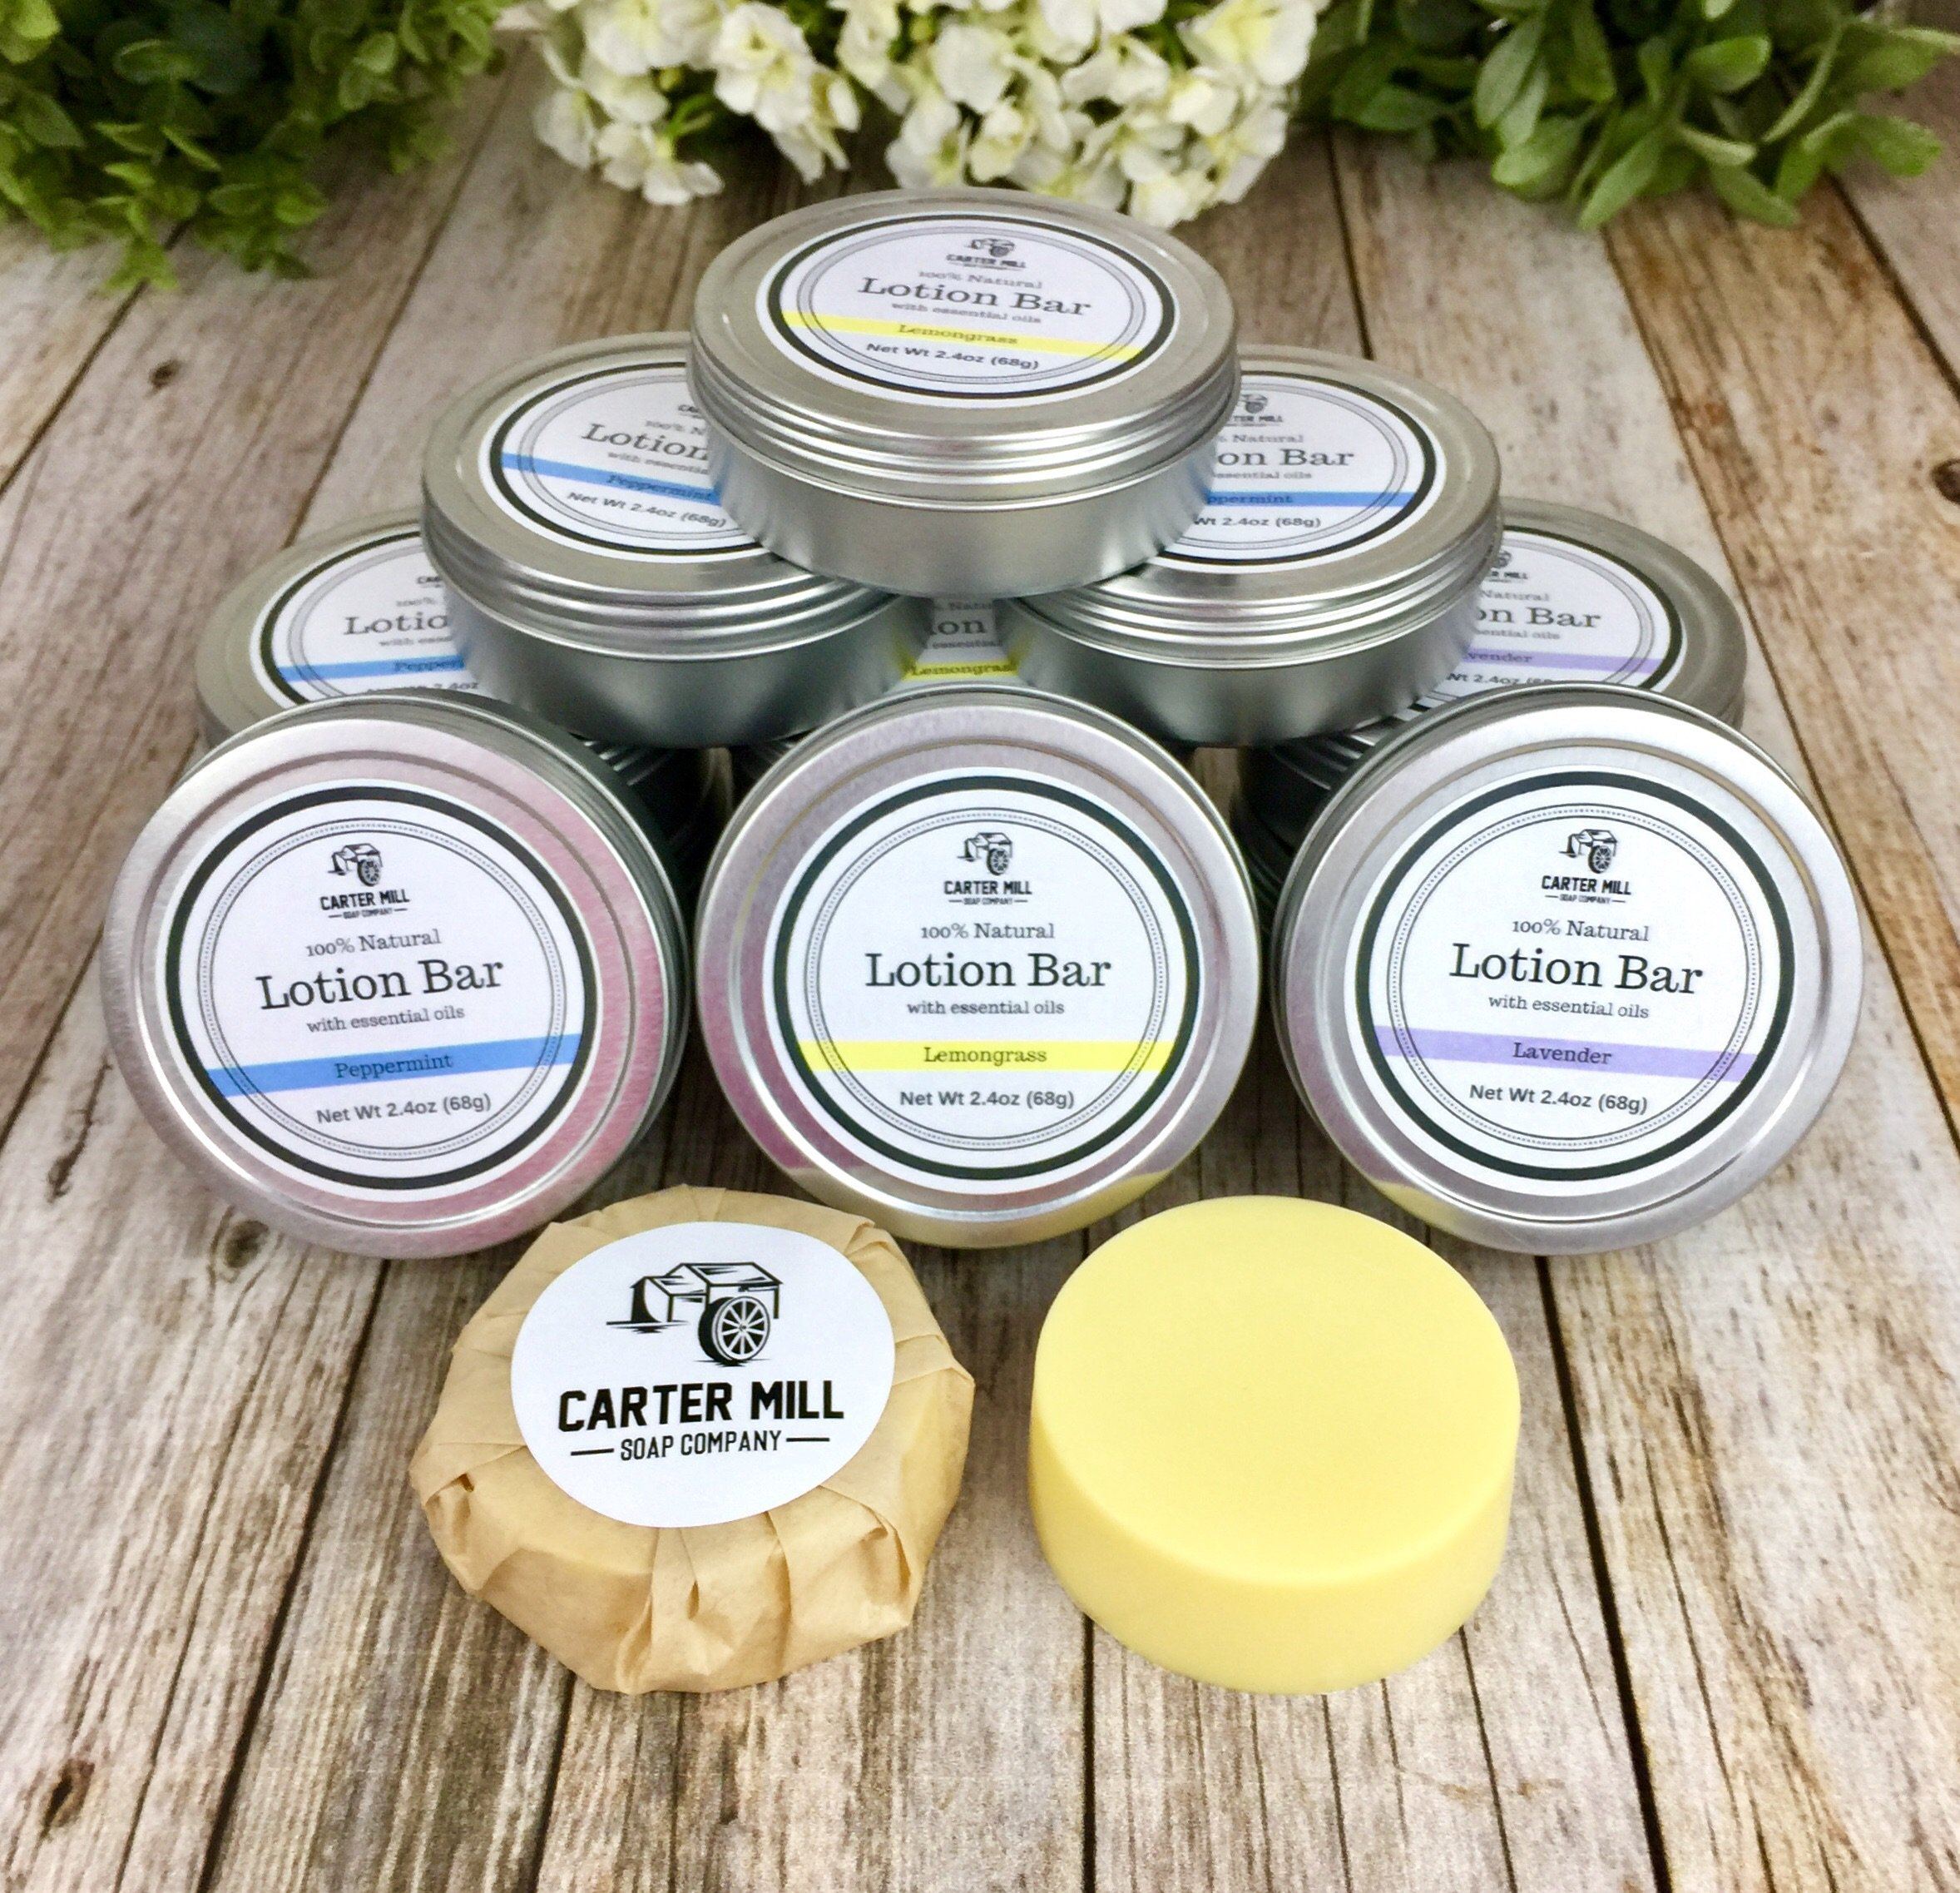 Carter Mill Soap Company Lotion Bar with Shea Butter